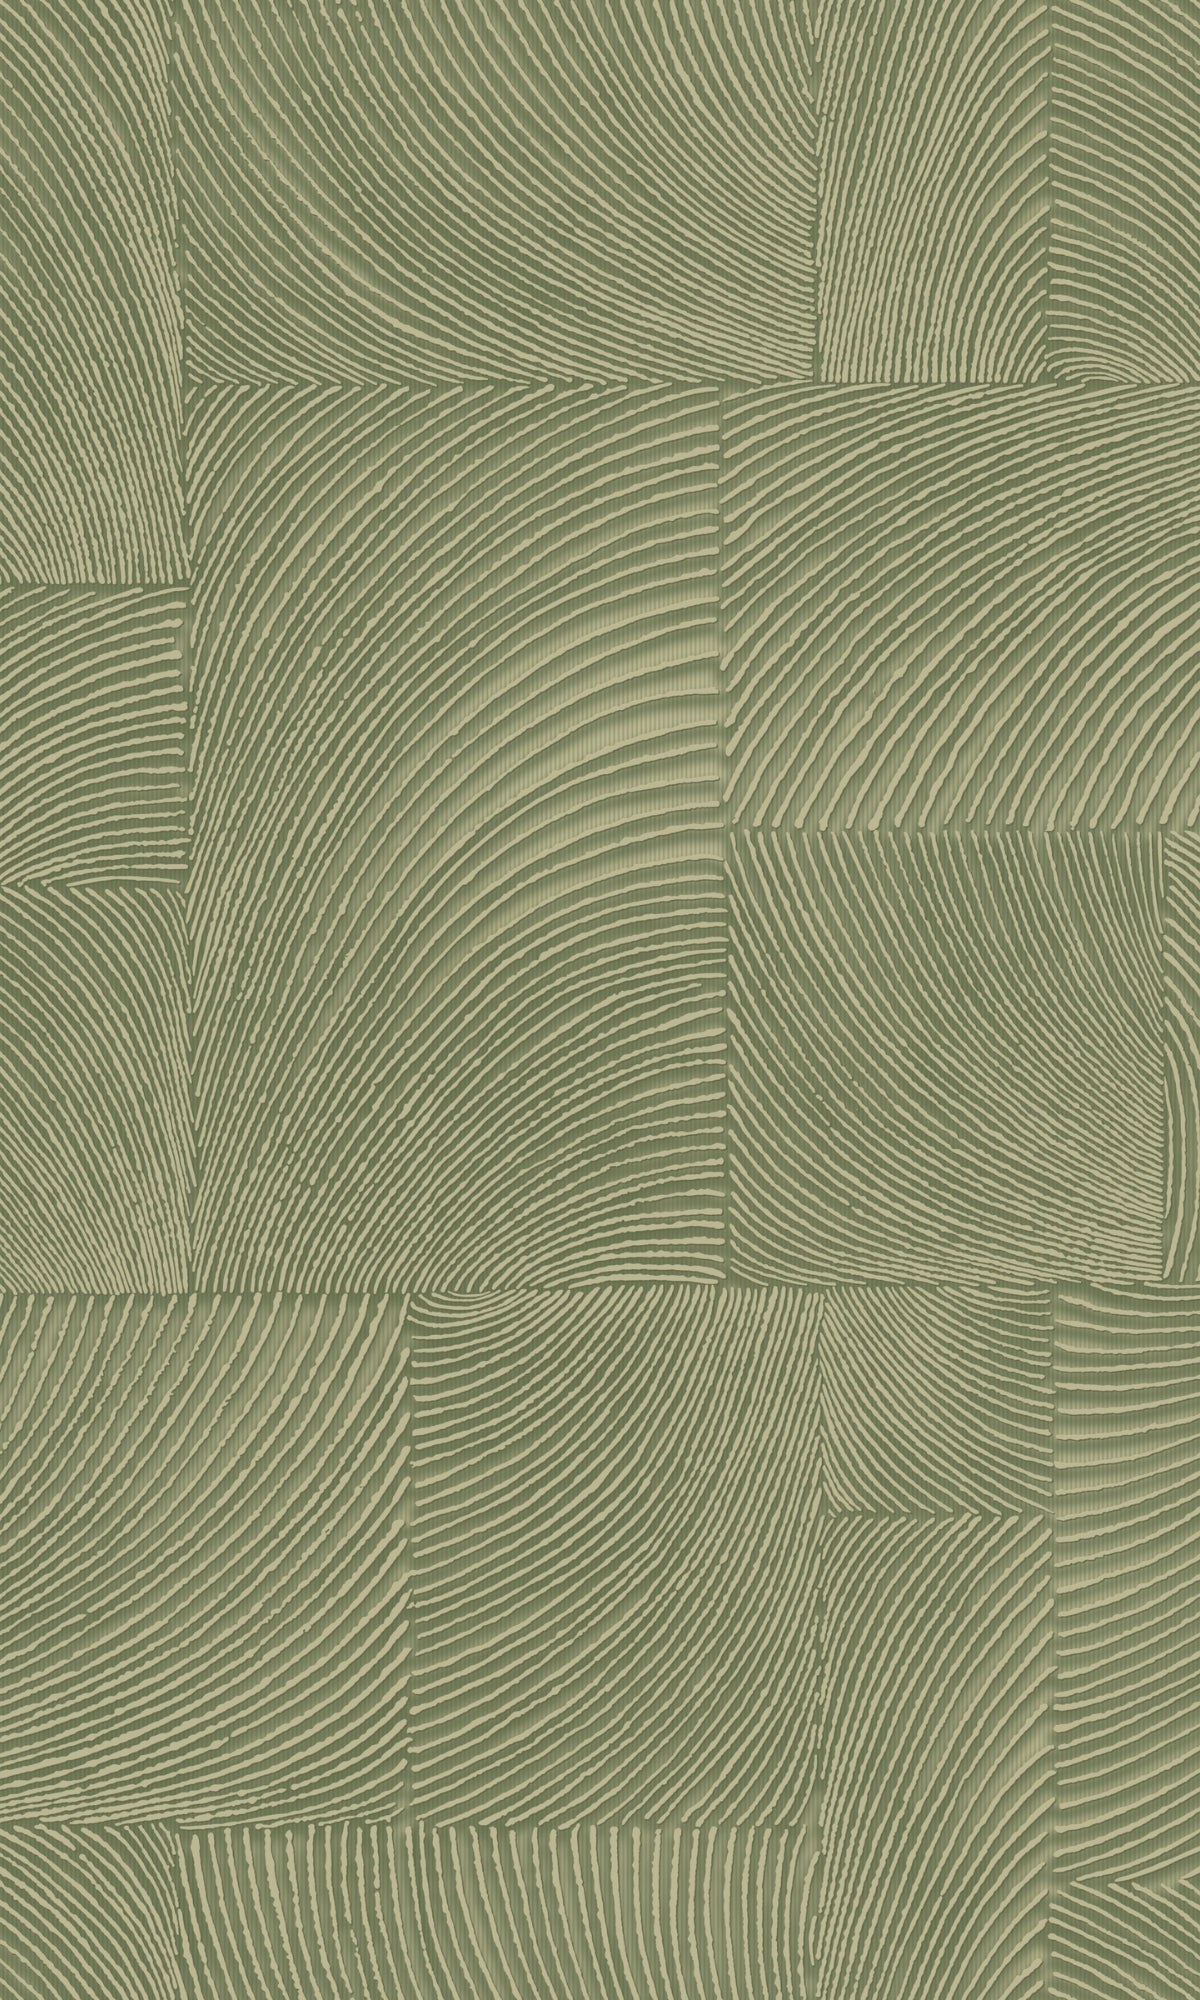 Green Abstract Geometric Waves Wallpaper R9320